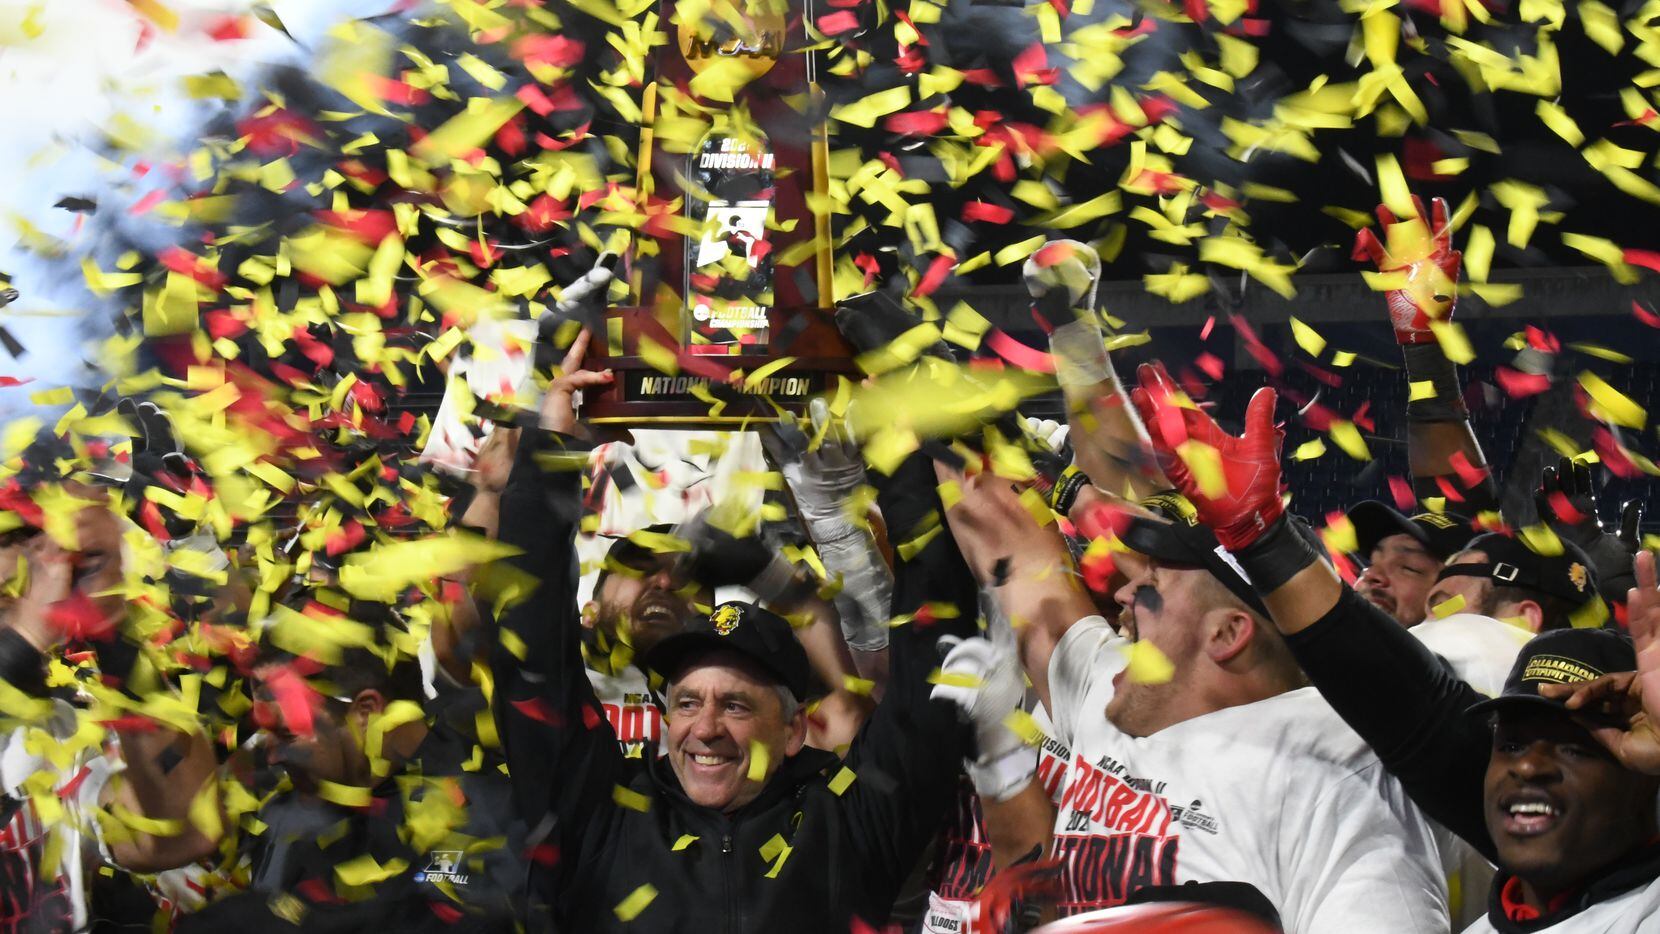 Ferris State’s Division II national championship win was built on ‘love’